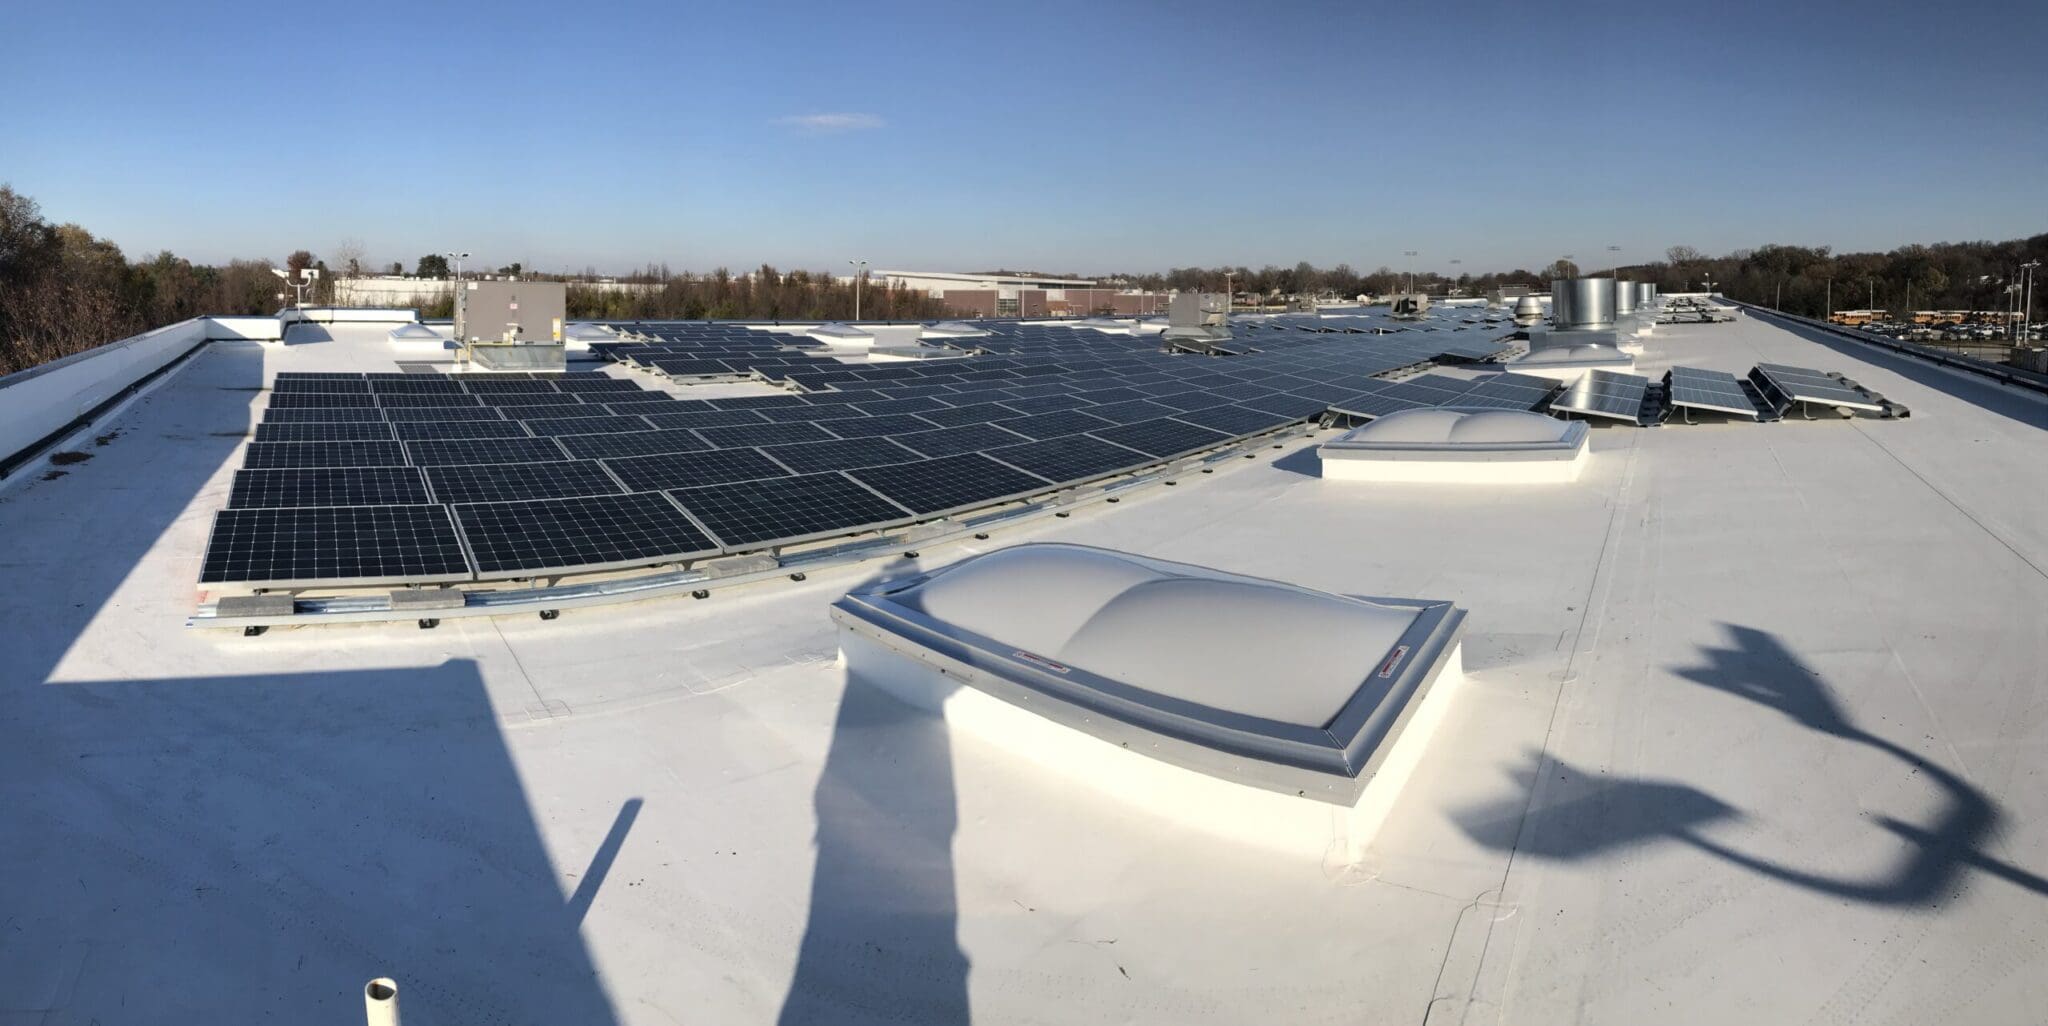 Pano view of a prefab facility with rooftop solar that offsets over 90% of its energy use